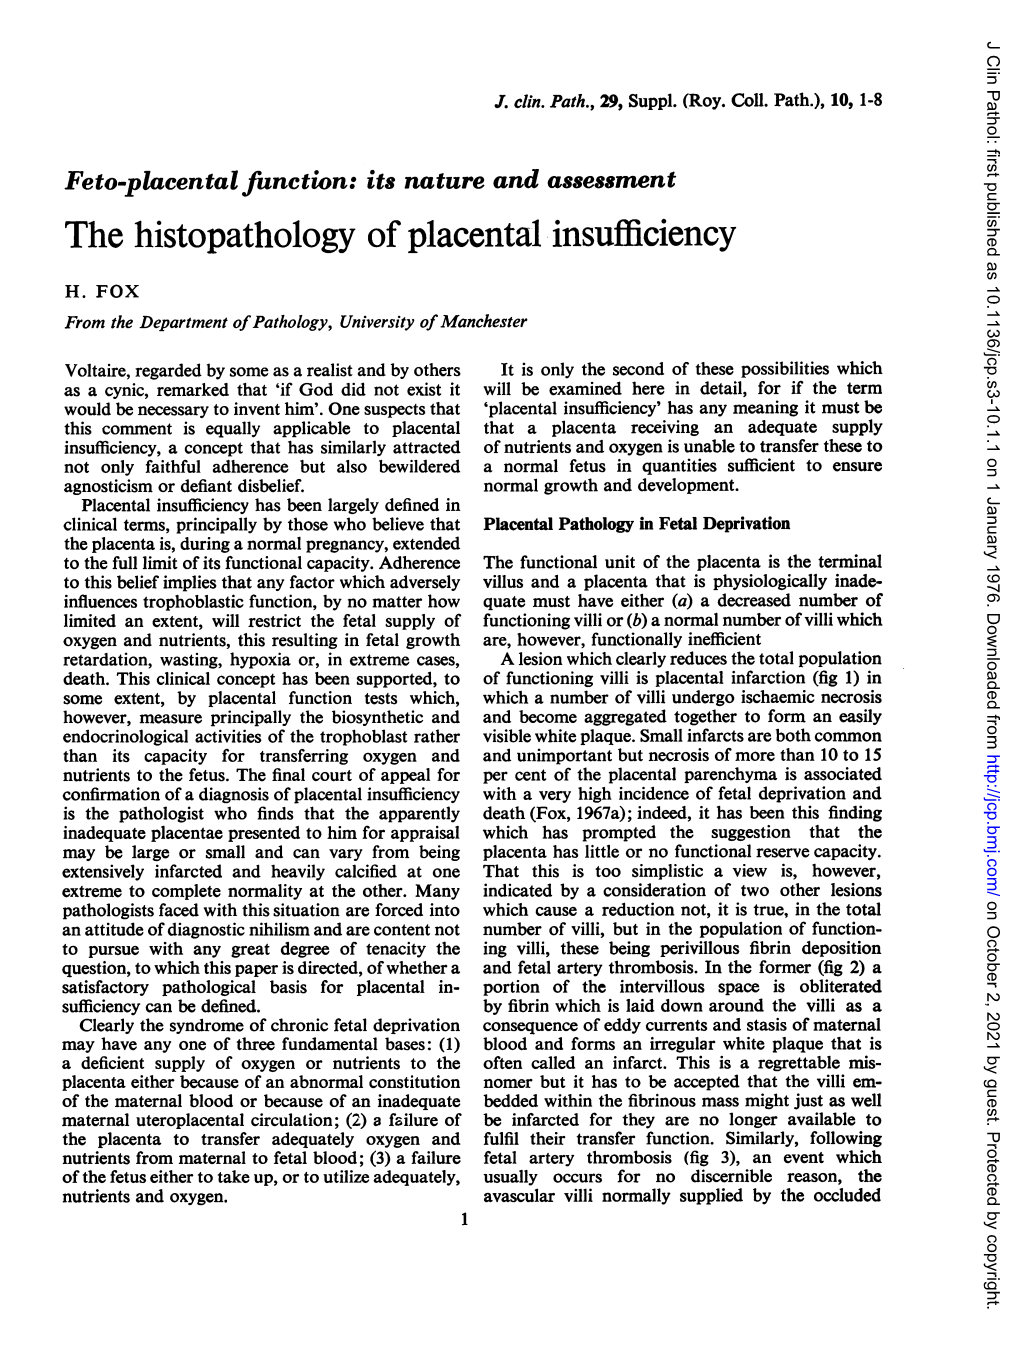 The Histopathology of Placental Insufficiency